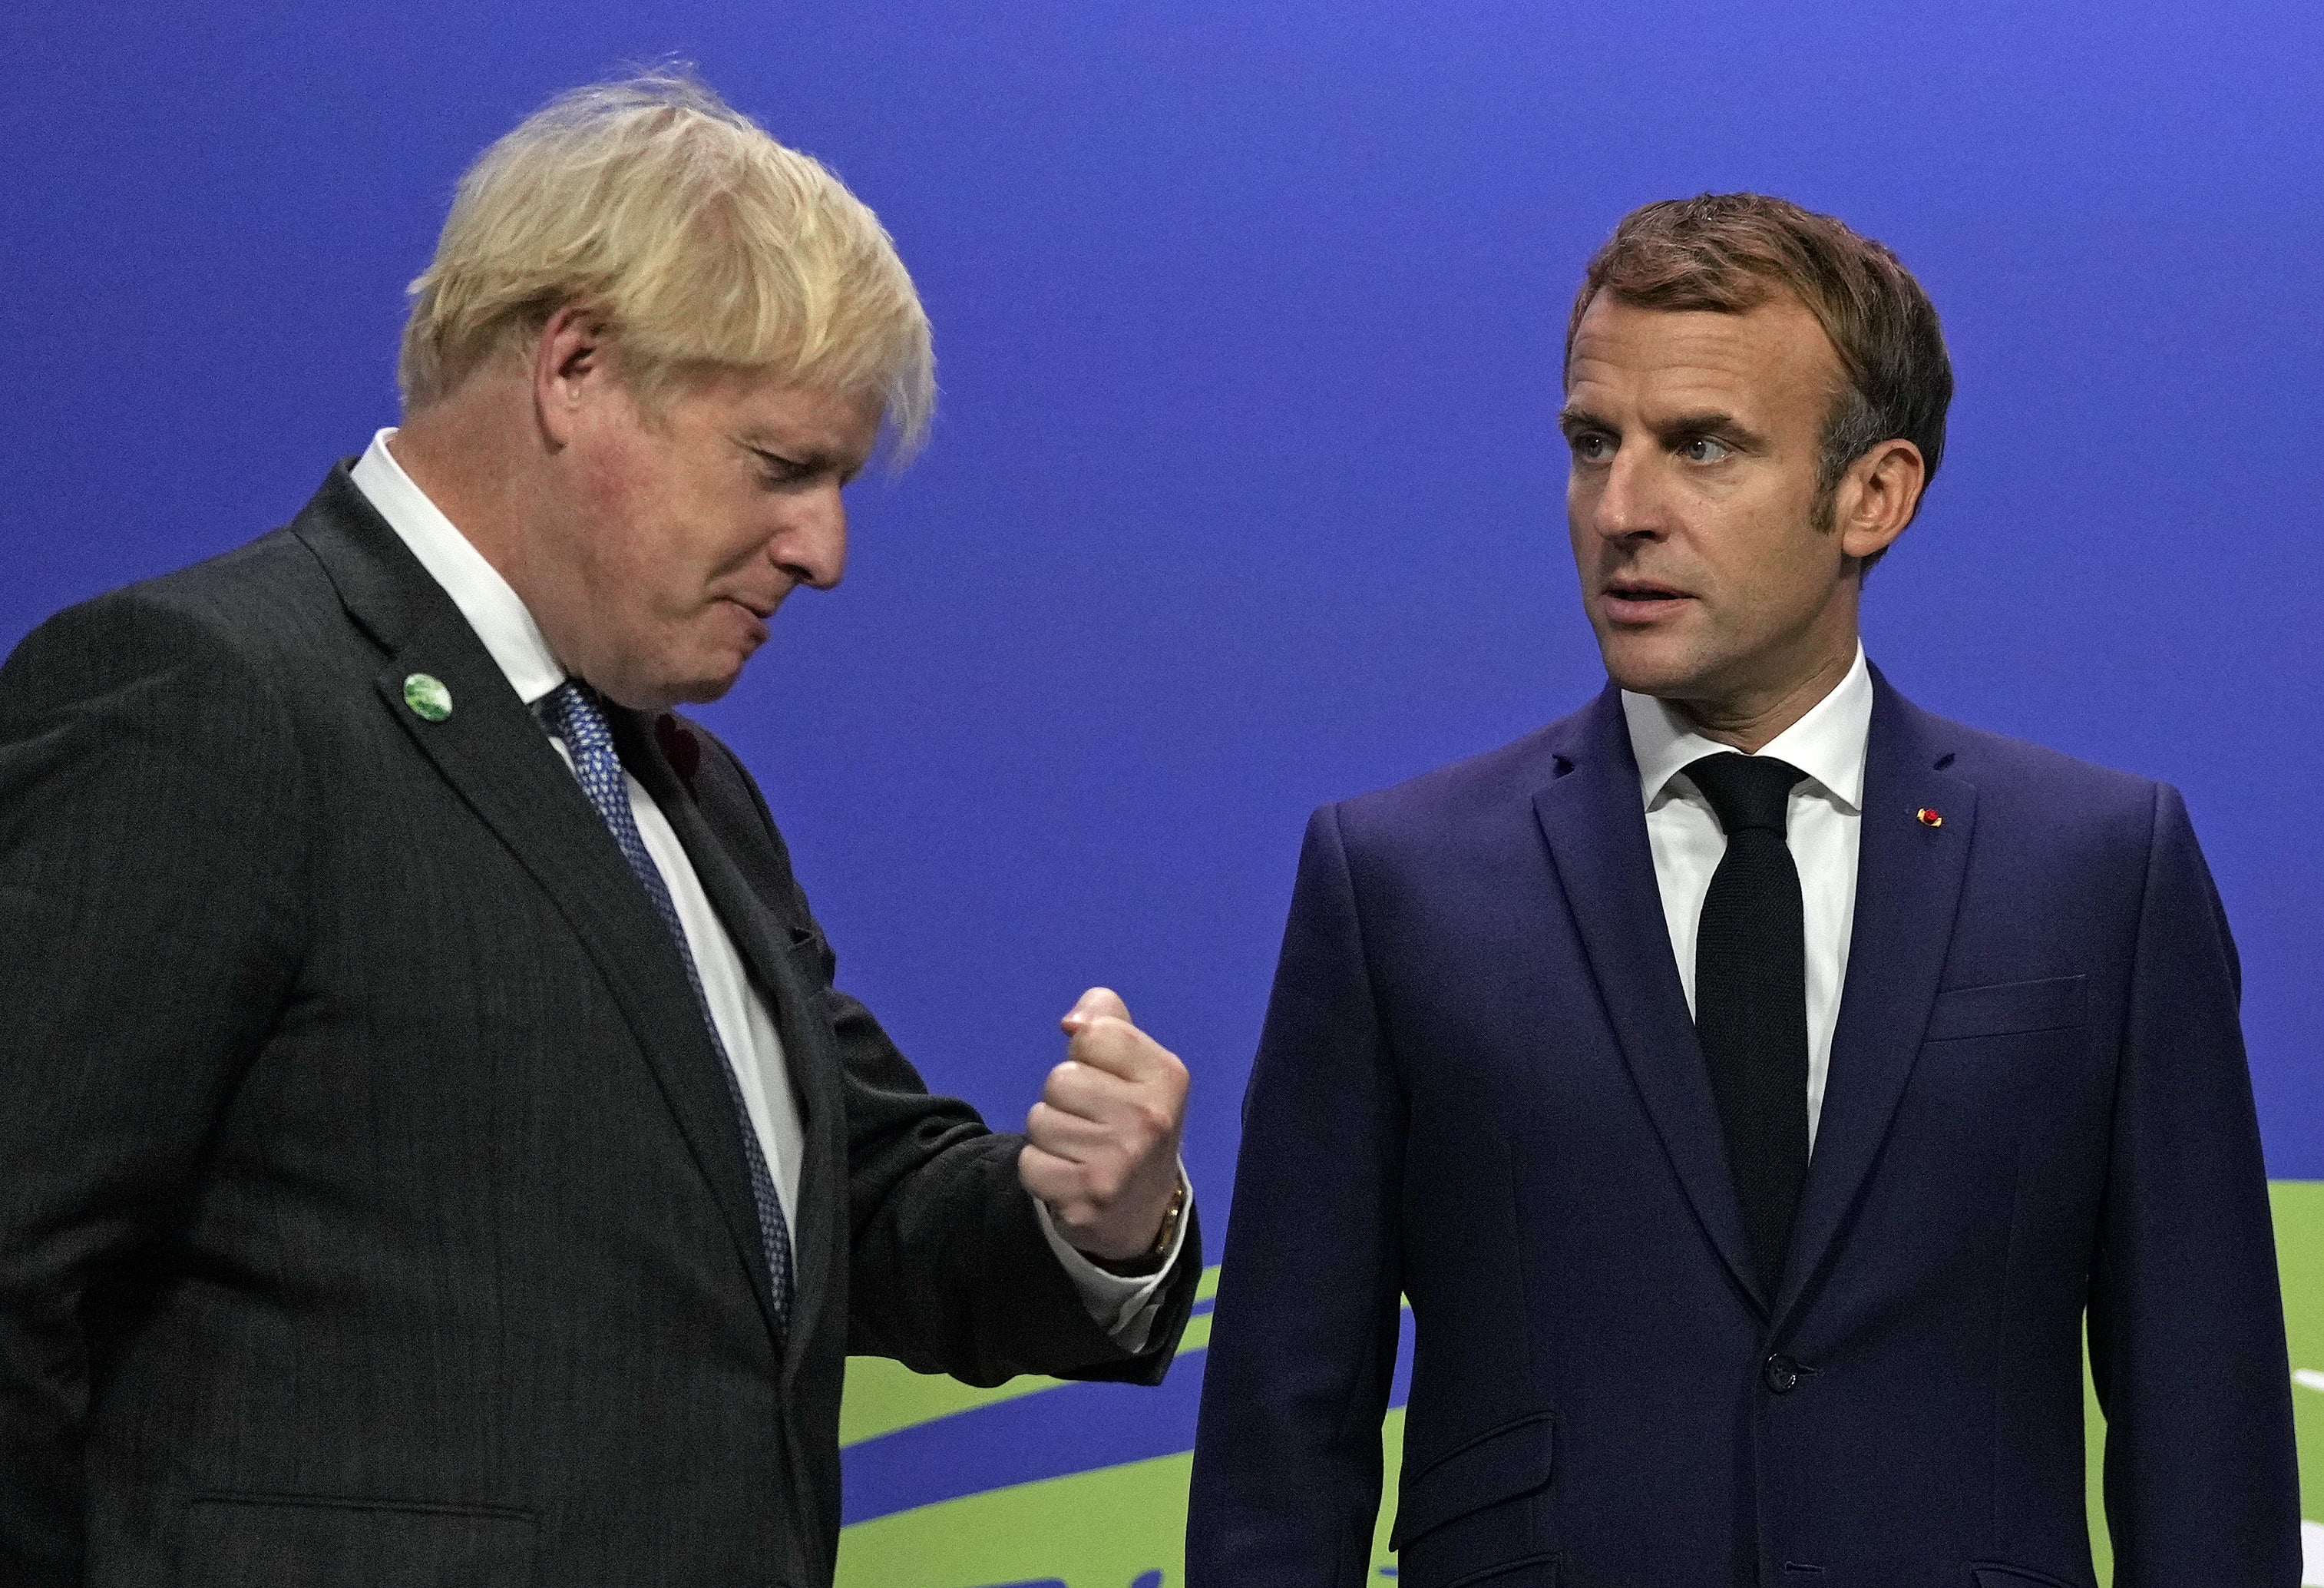 Mr Johnson and Mr Macron have publicly disagreed in the past